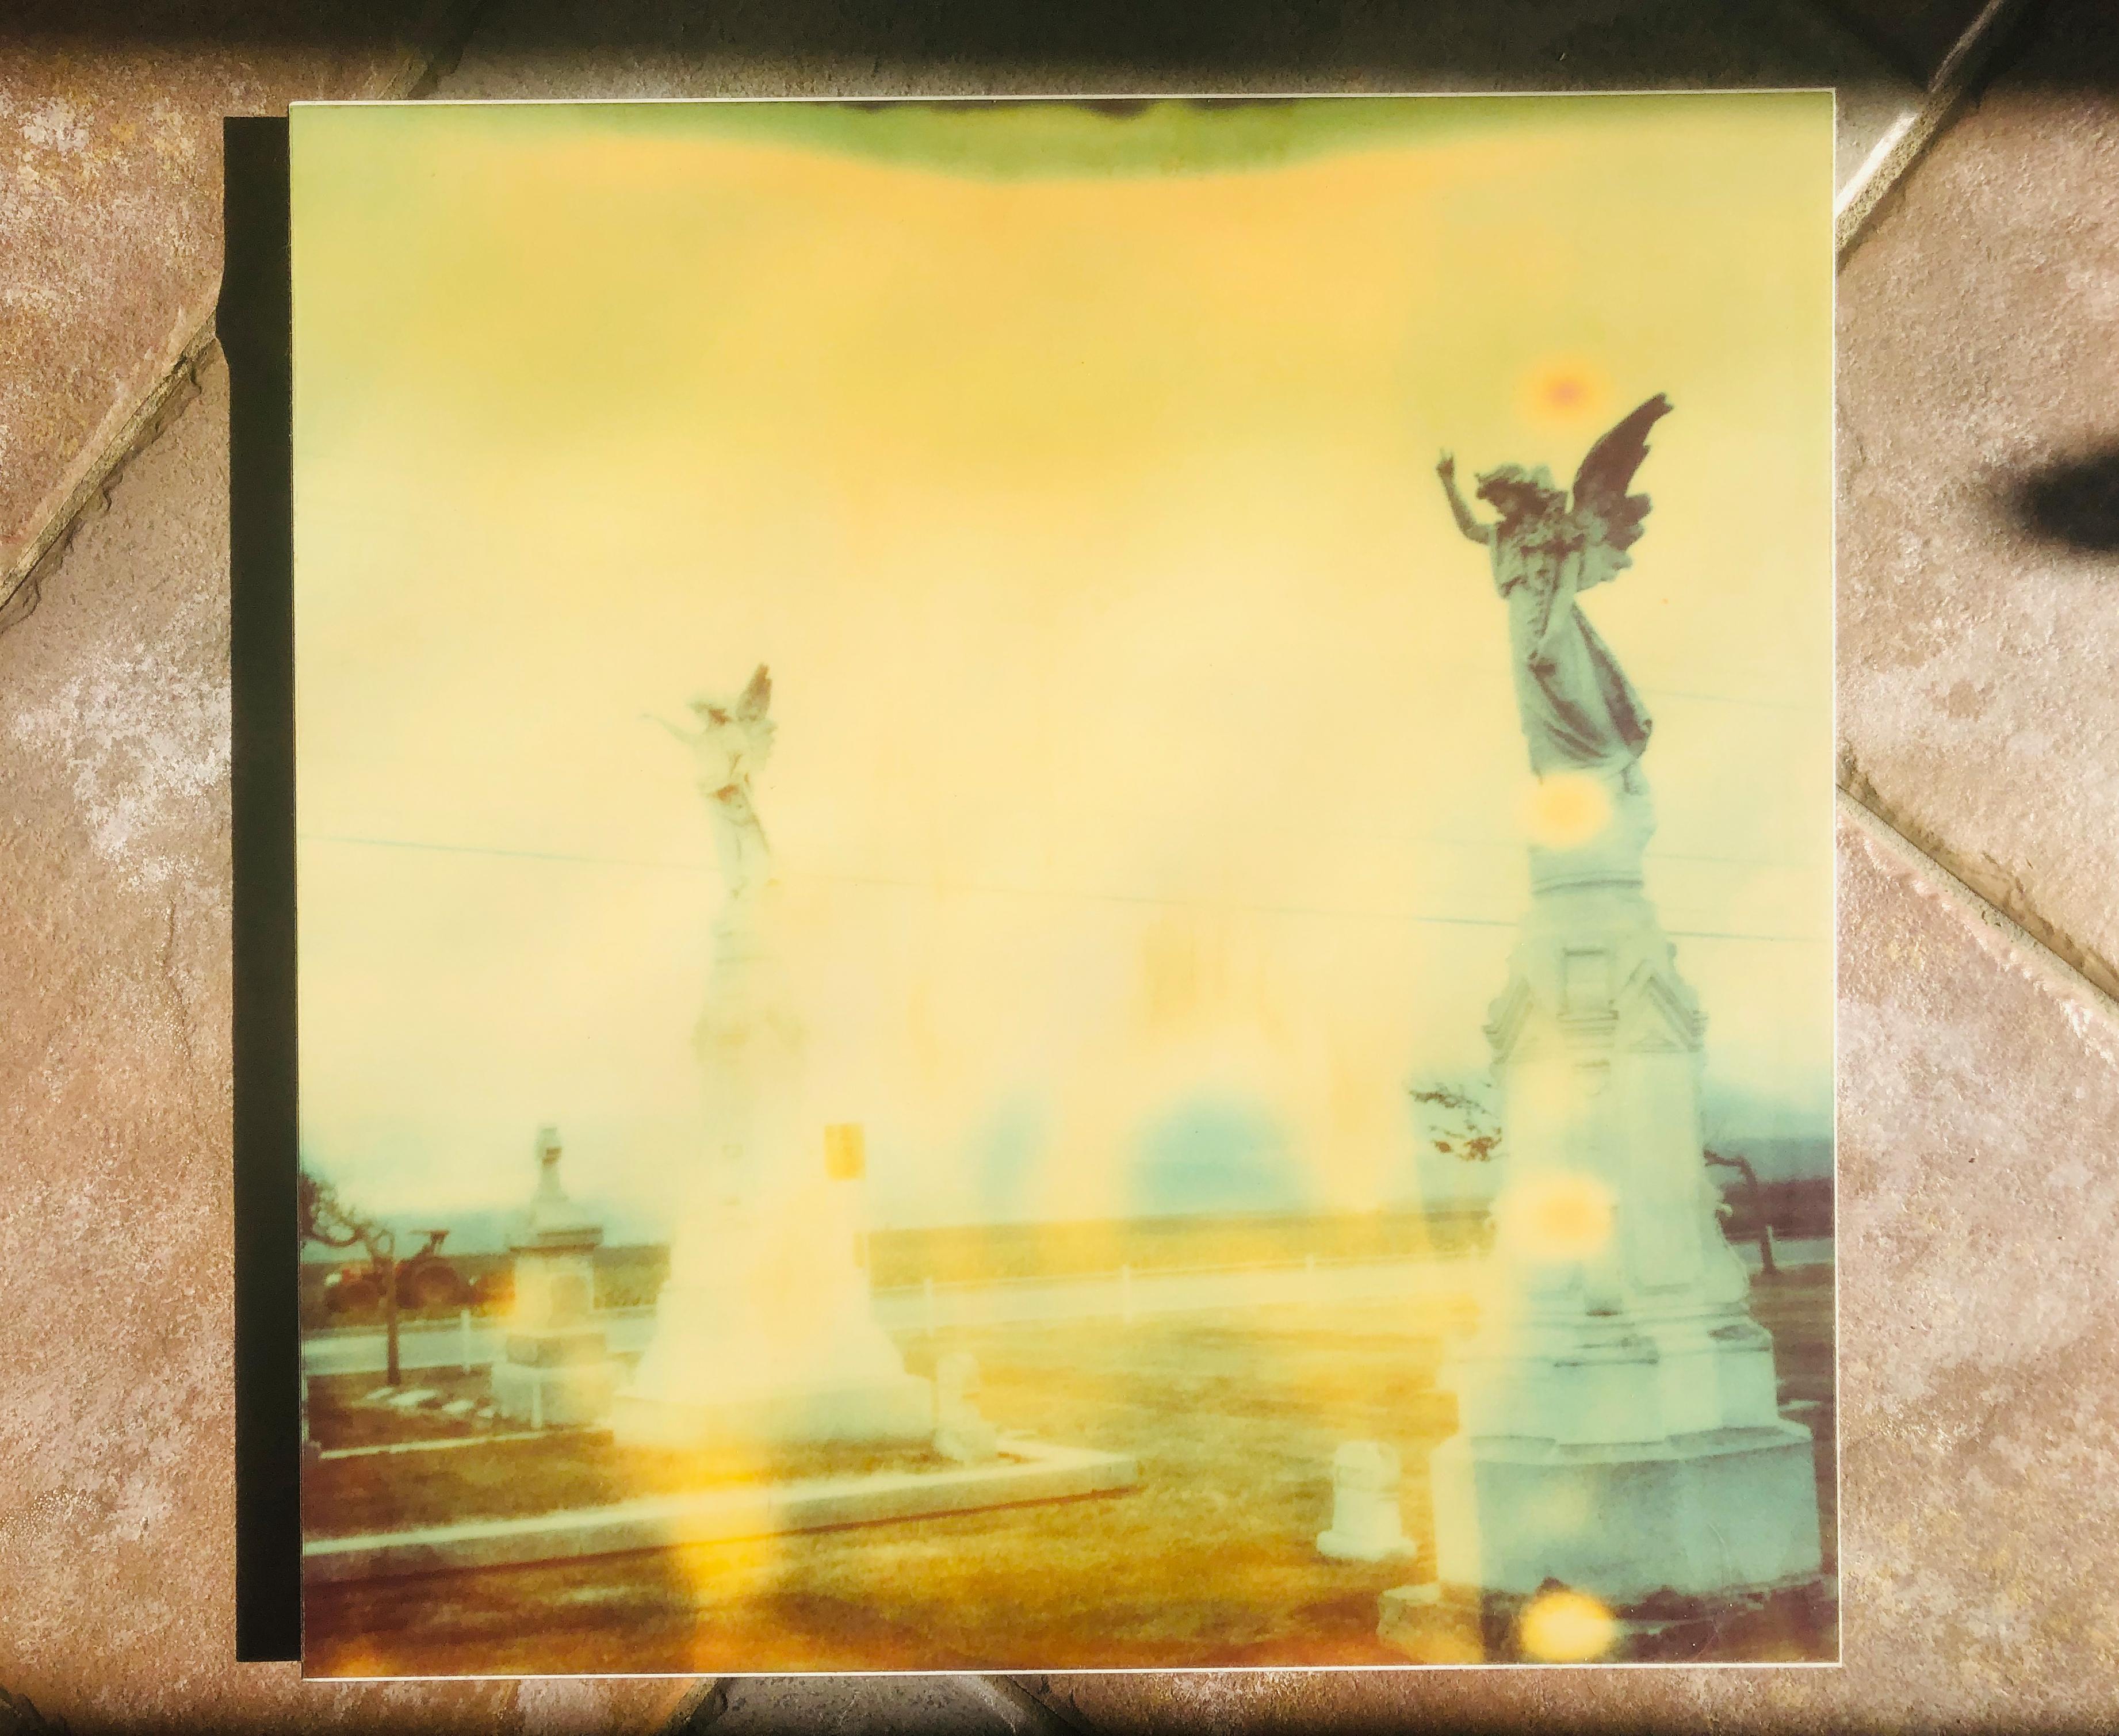 Guadaloupe (Last Picture Show) - mounted, analog, Polaroid, Contemporary, Color - Photograph by Stefanie Schneider